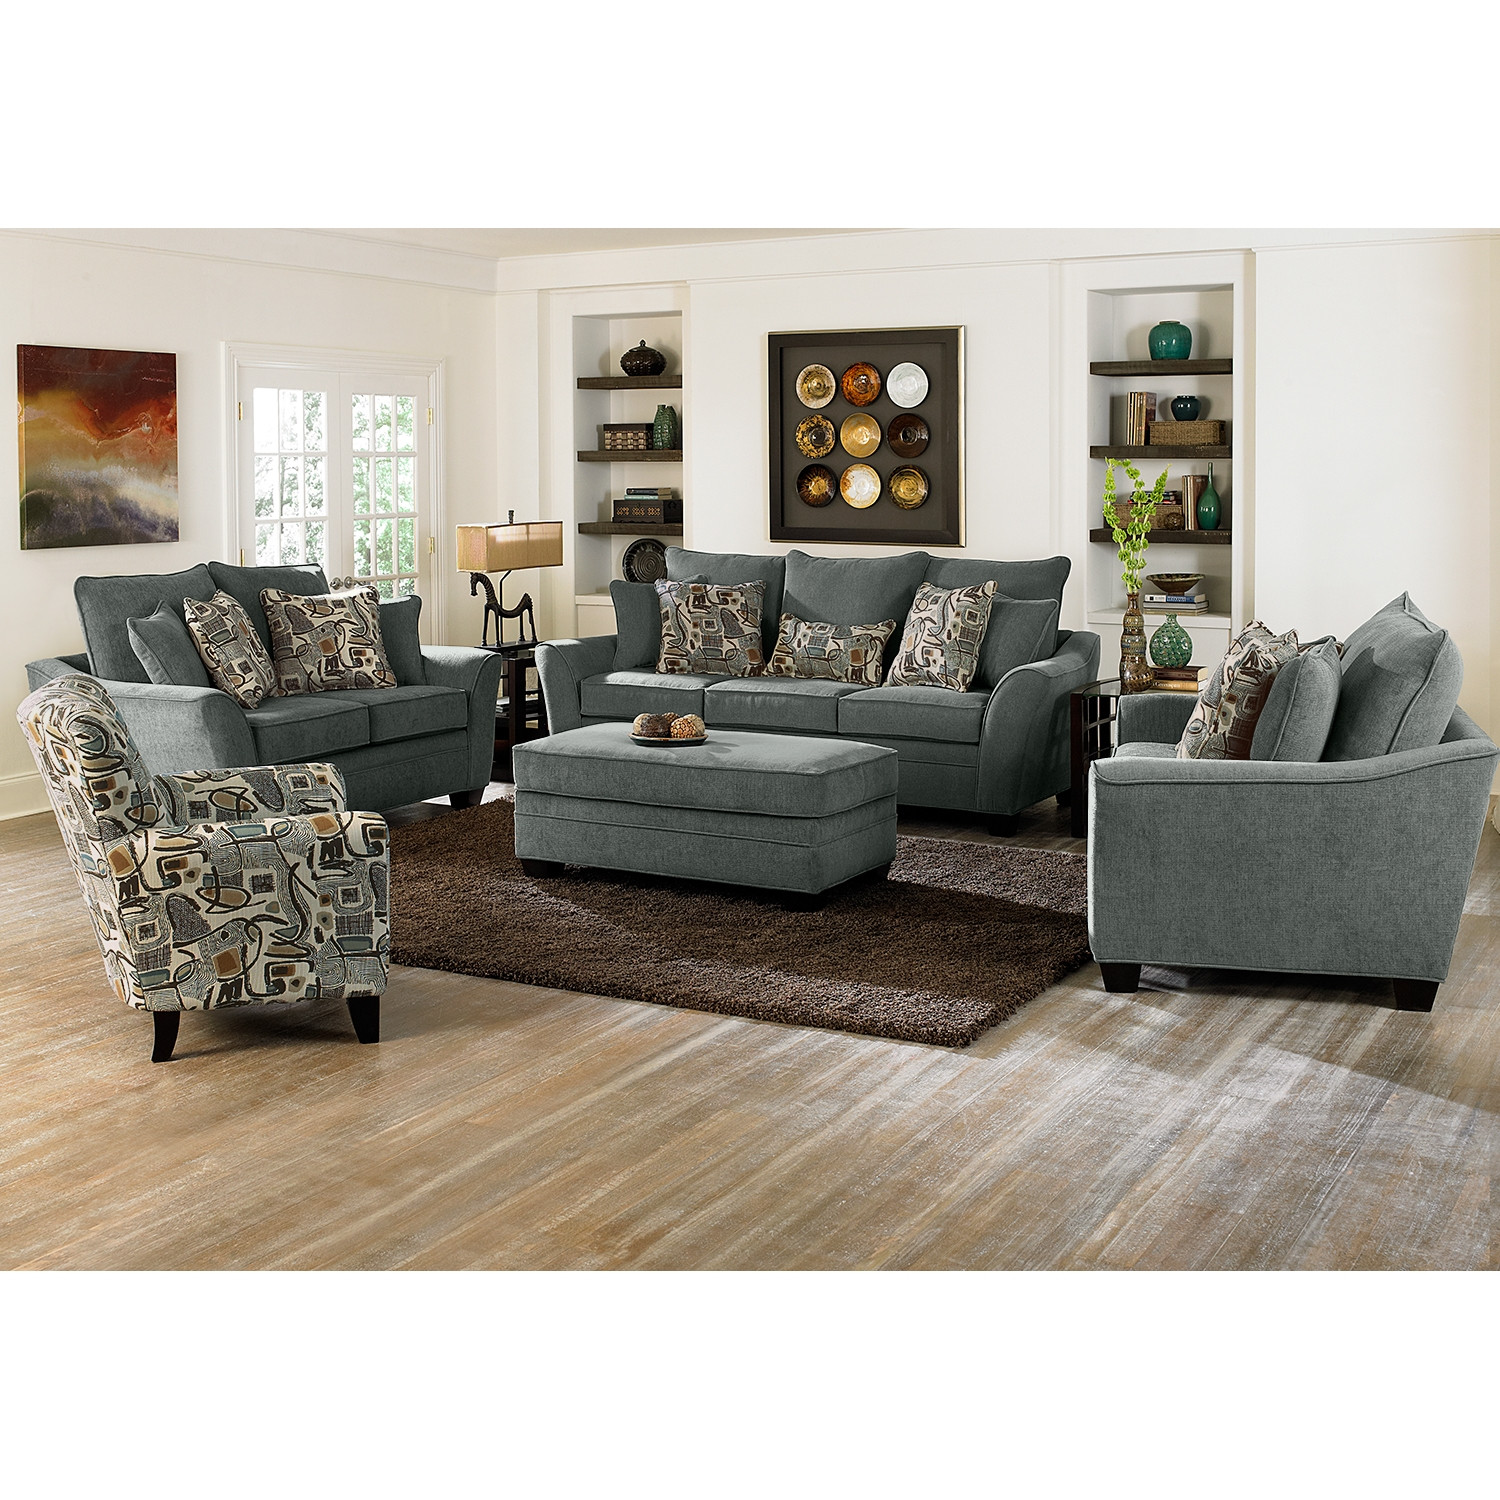 Chair For Living Room
 Perfect Chairs With Ottomans For Living Room – HomesFeed